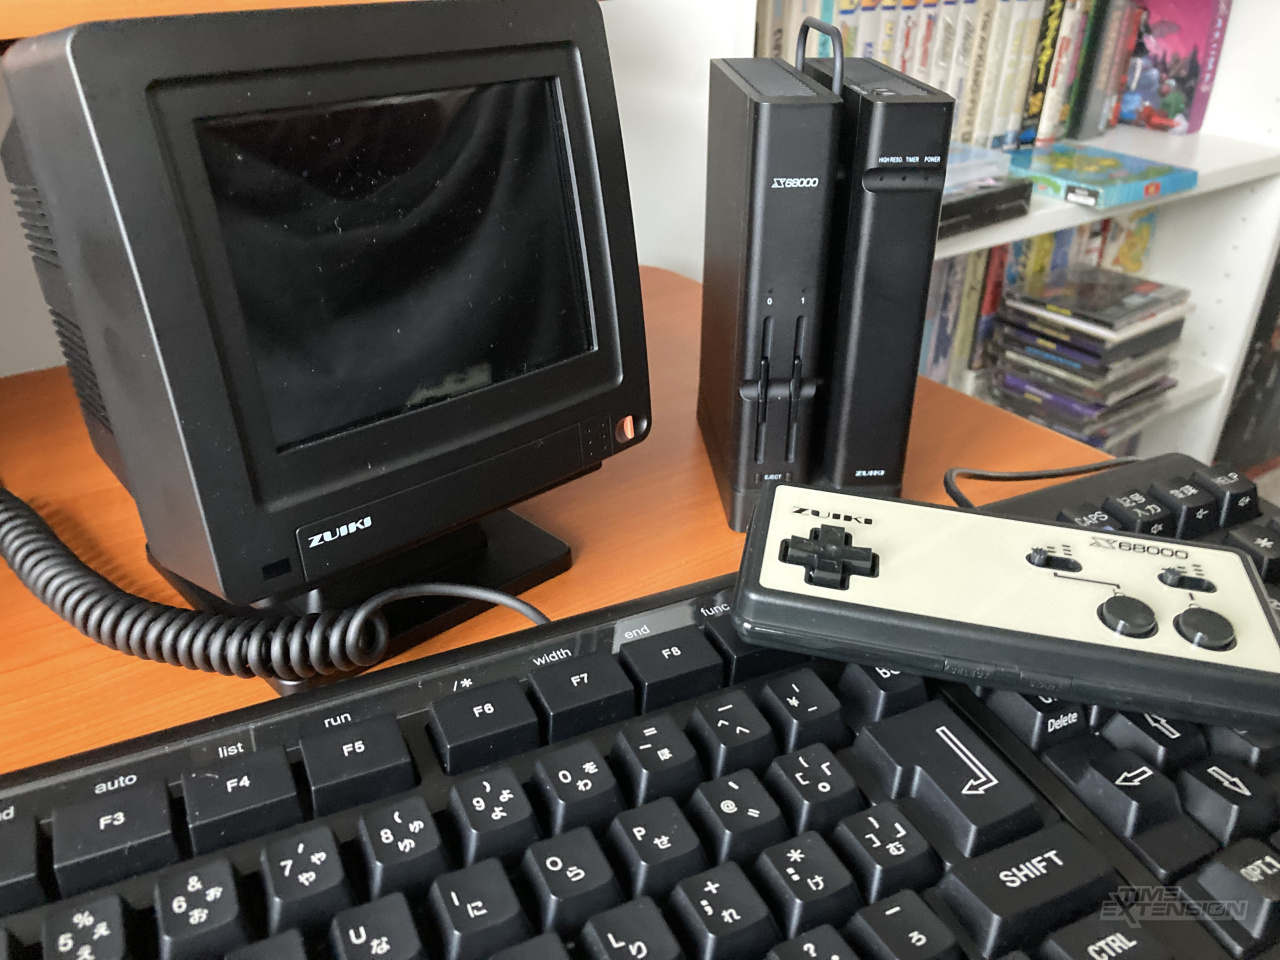 Review: Zuiki X68000 Z - An Expensive But Appealing Substitute For 